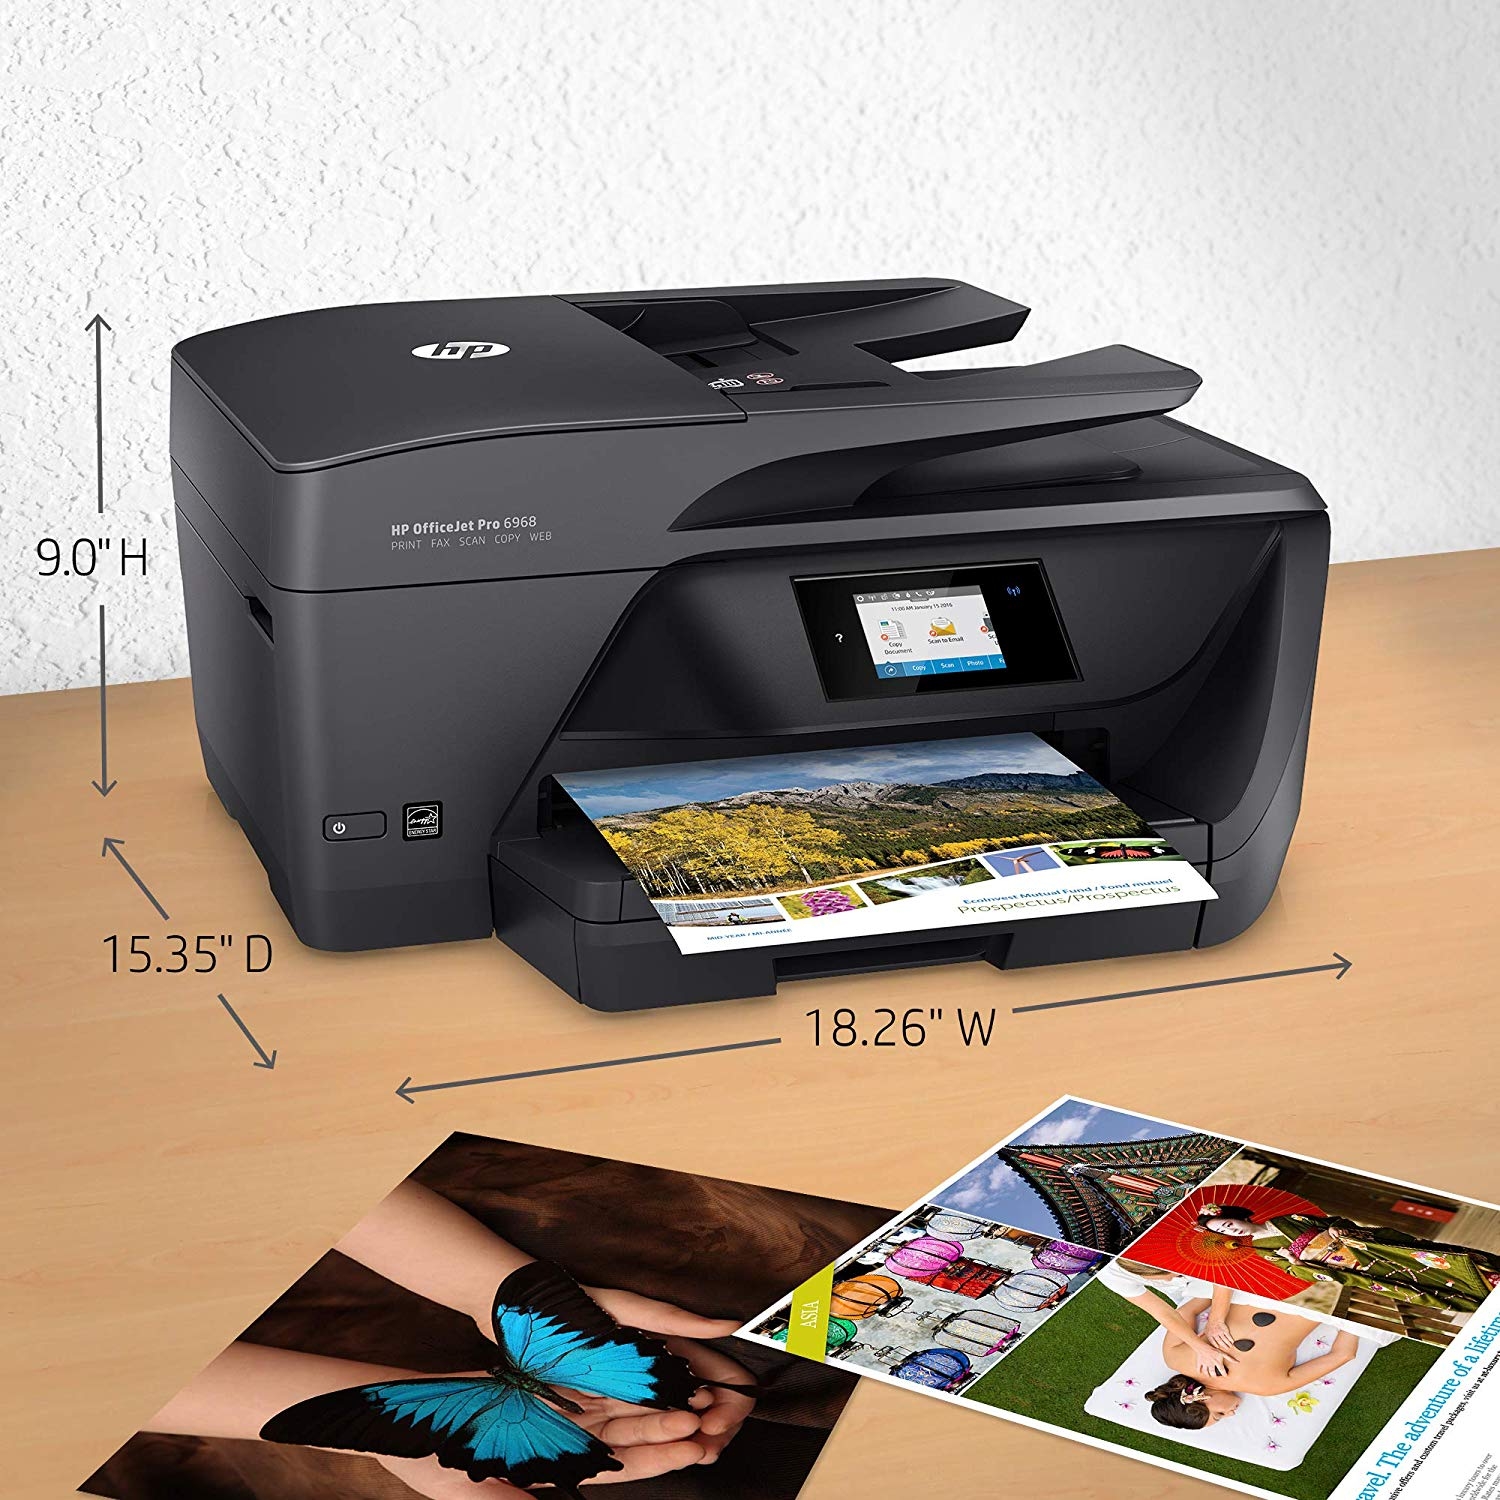 hp officejet pro 6968 not printing